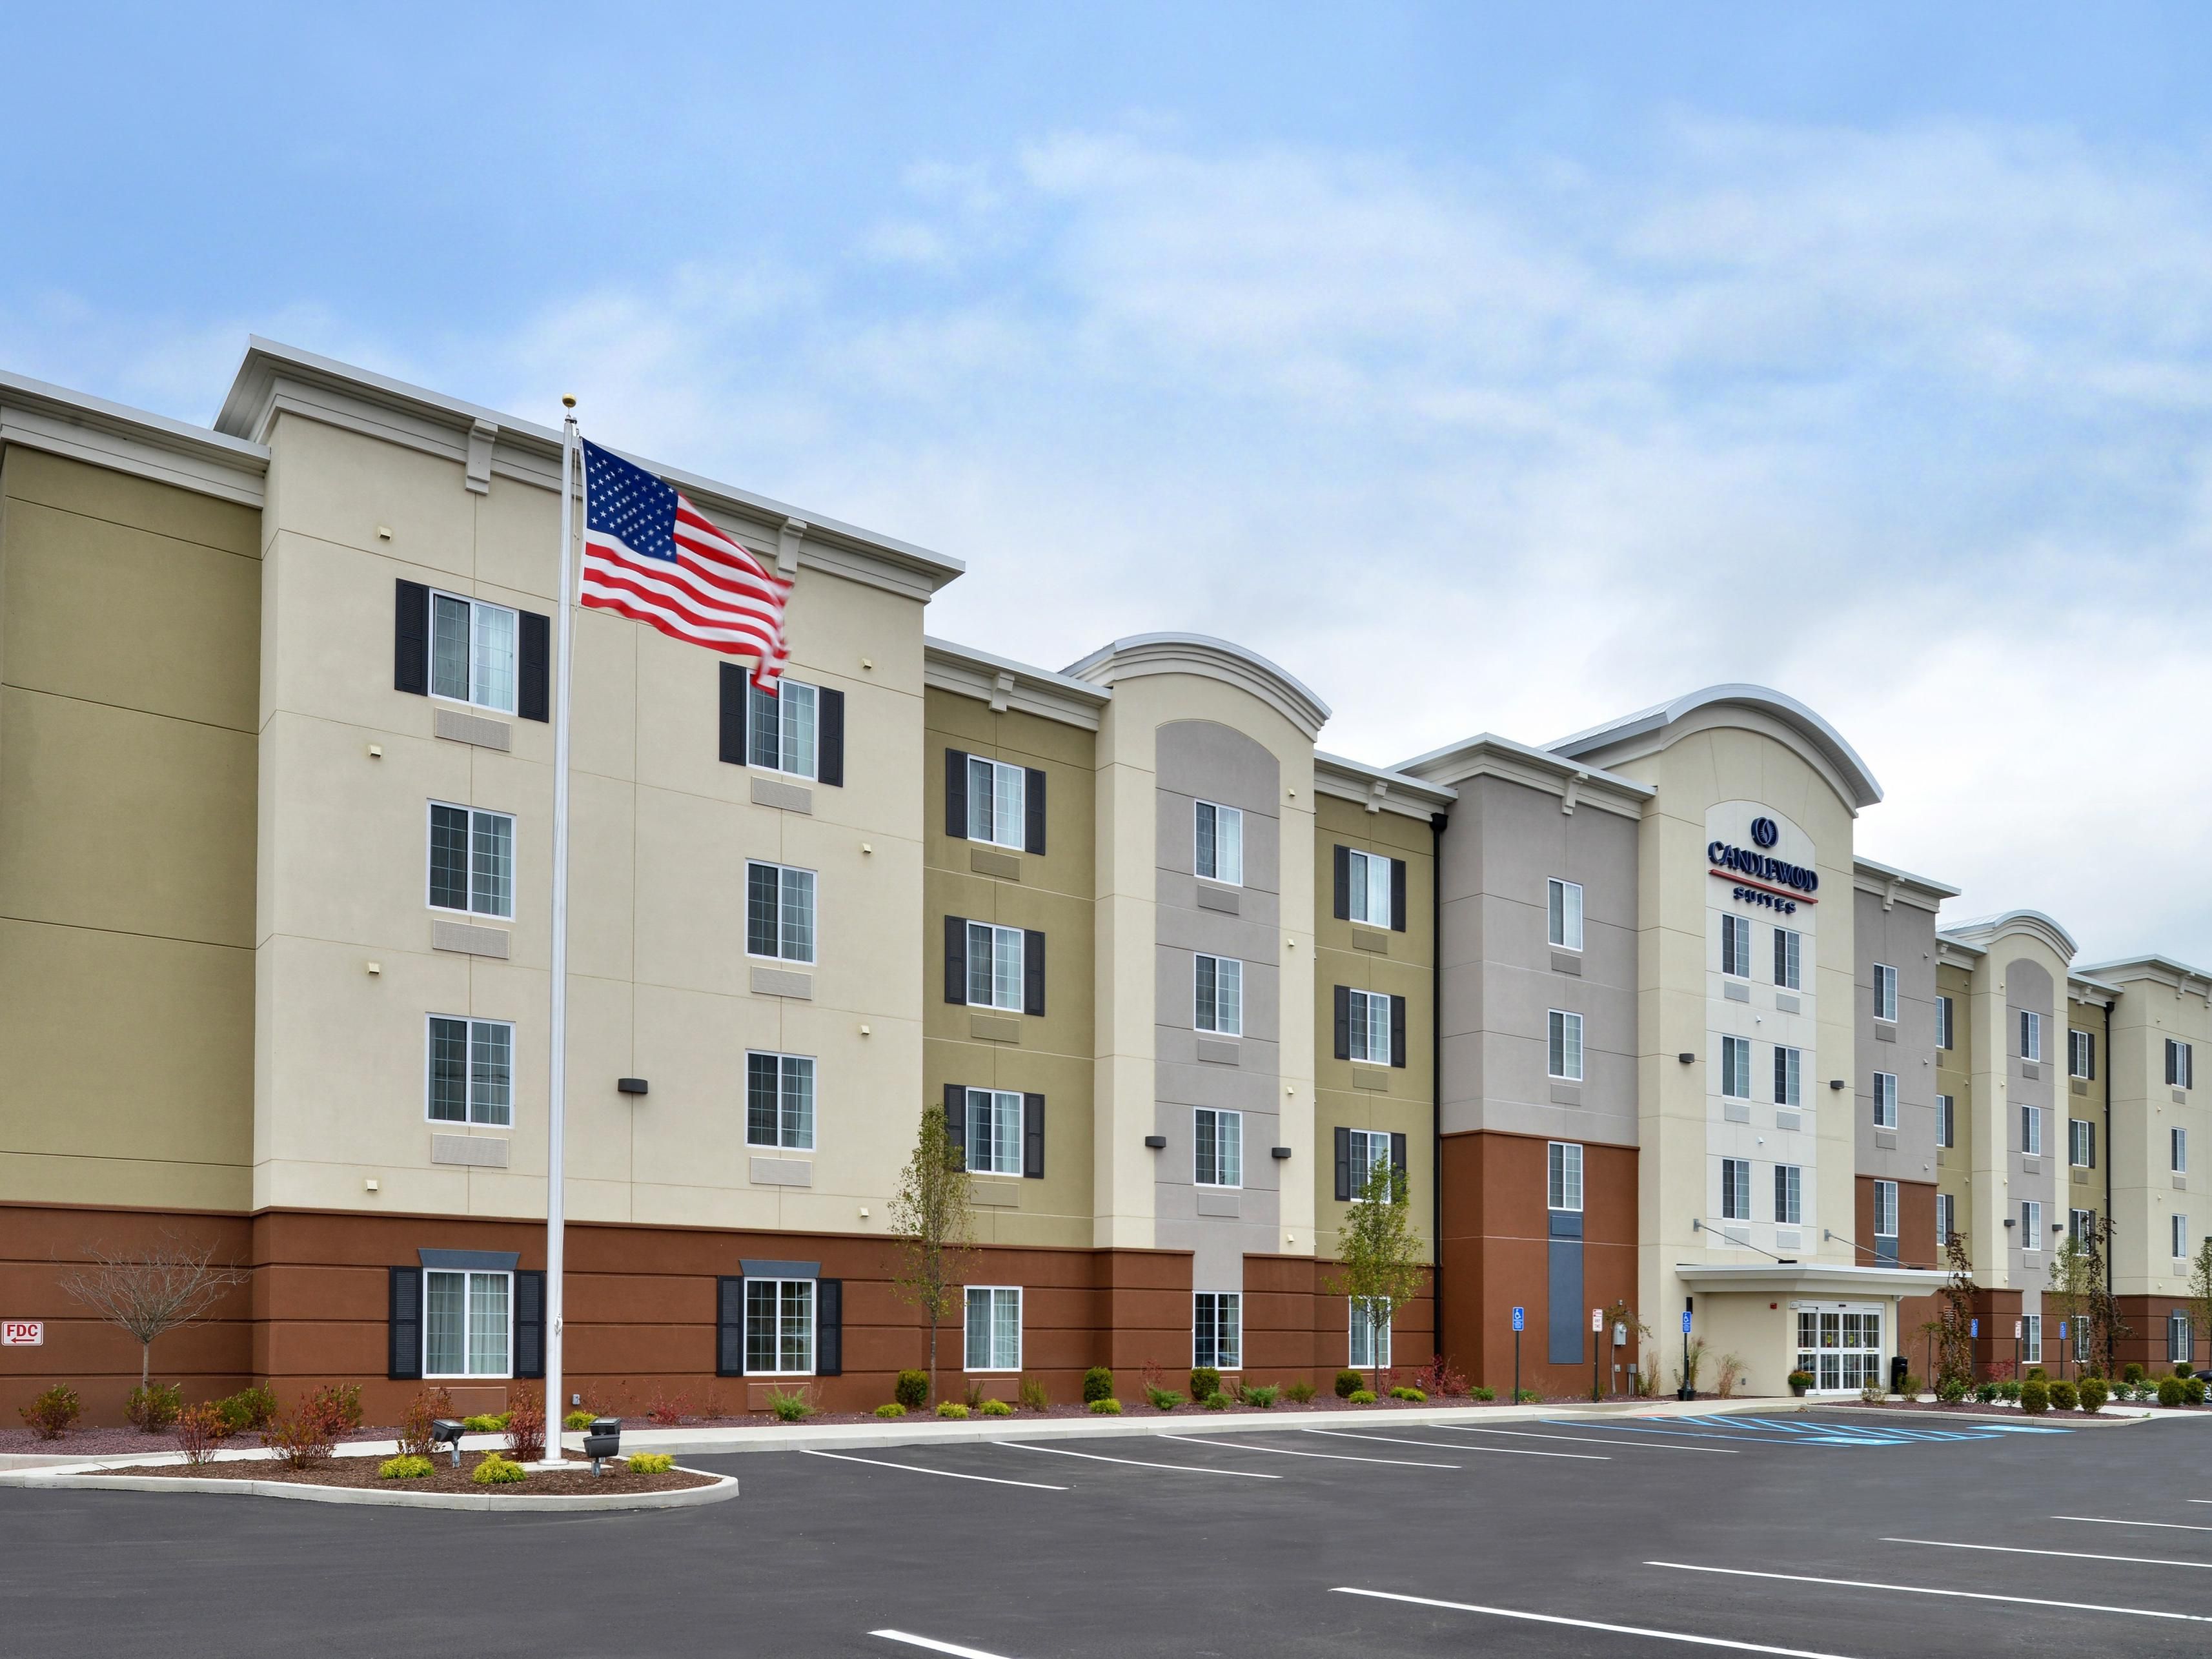 Sayre Hotels: Candlewood Suites Sayre - Extended Stay Hotel in Sayre